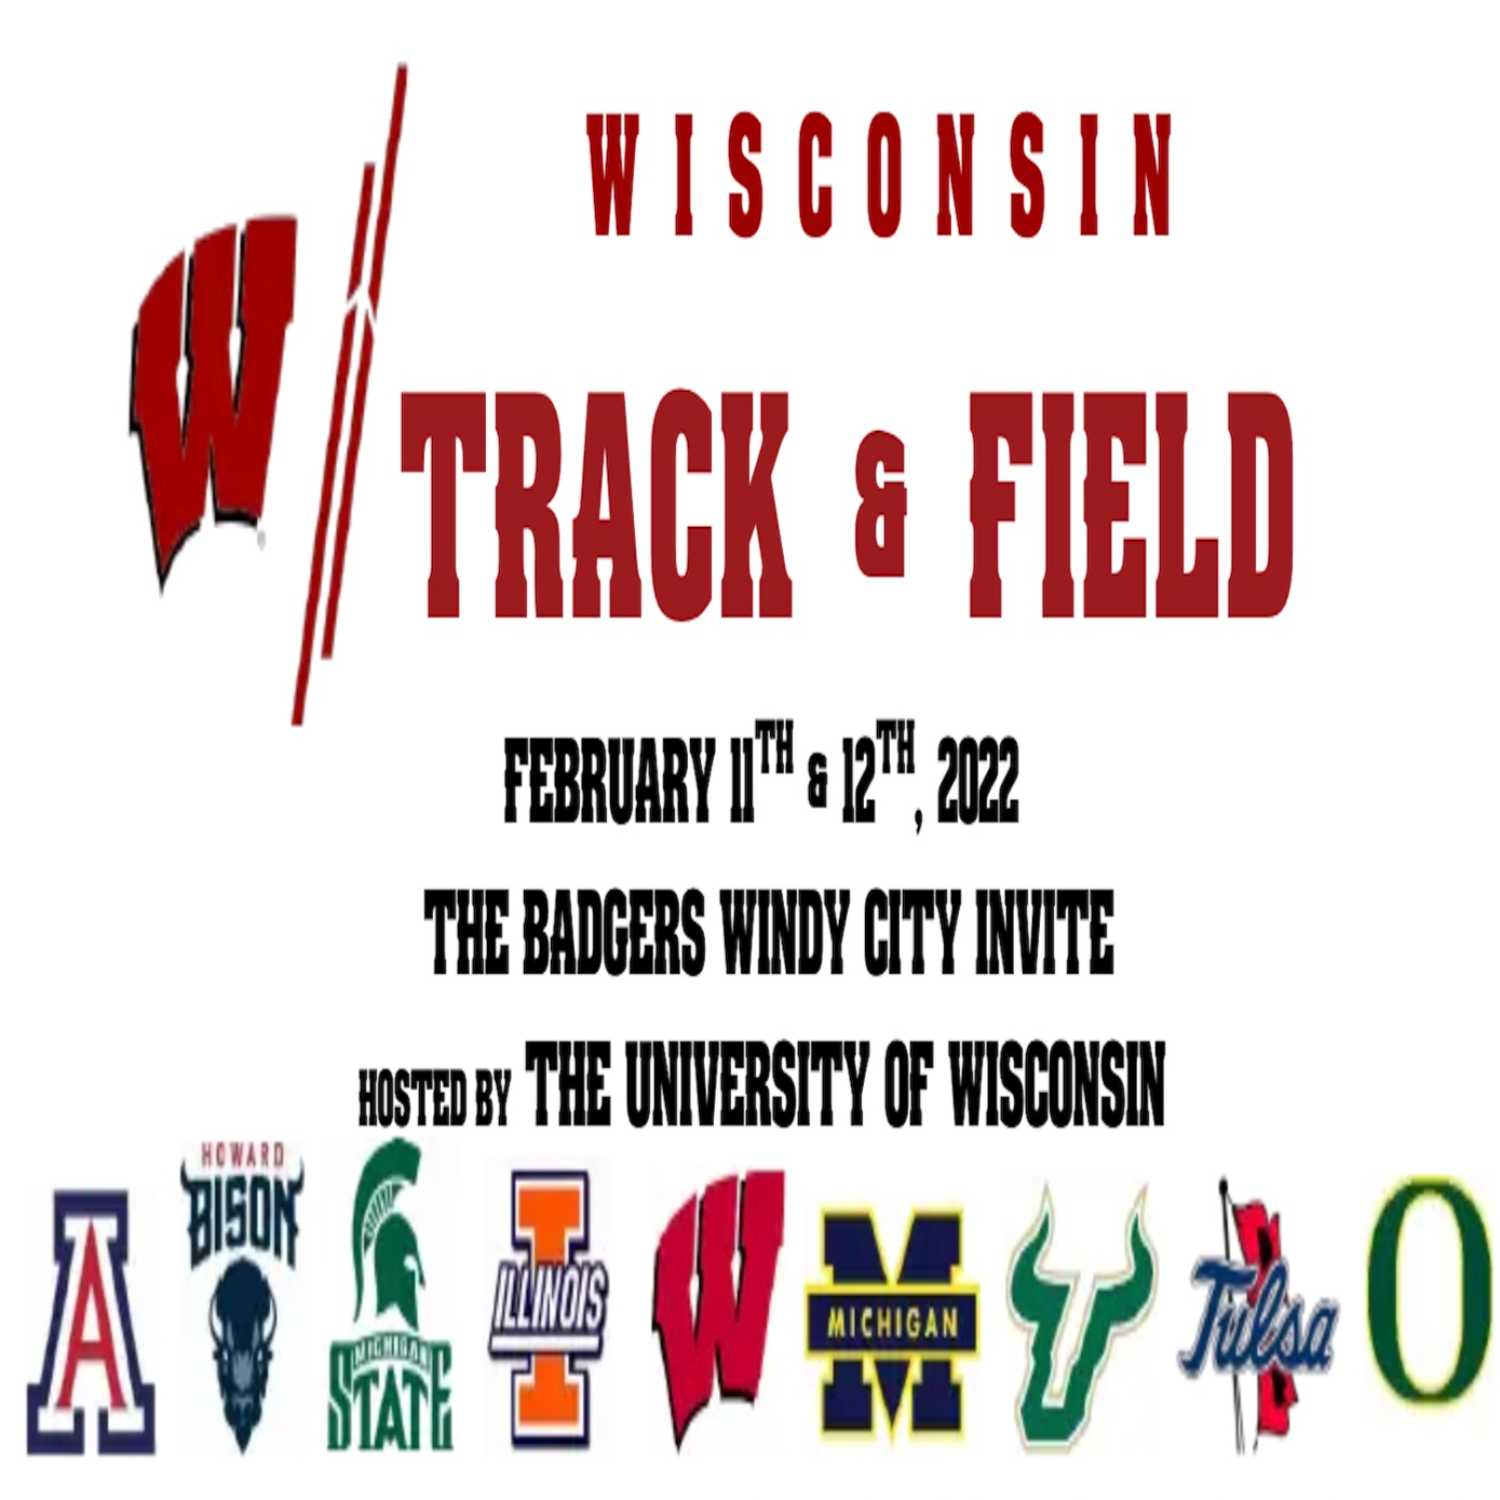 {{Meet Recap with TG}}: 3:50.17 Mile @ the Badgers’ Windy City Invite